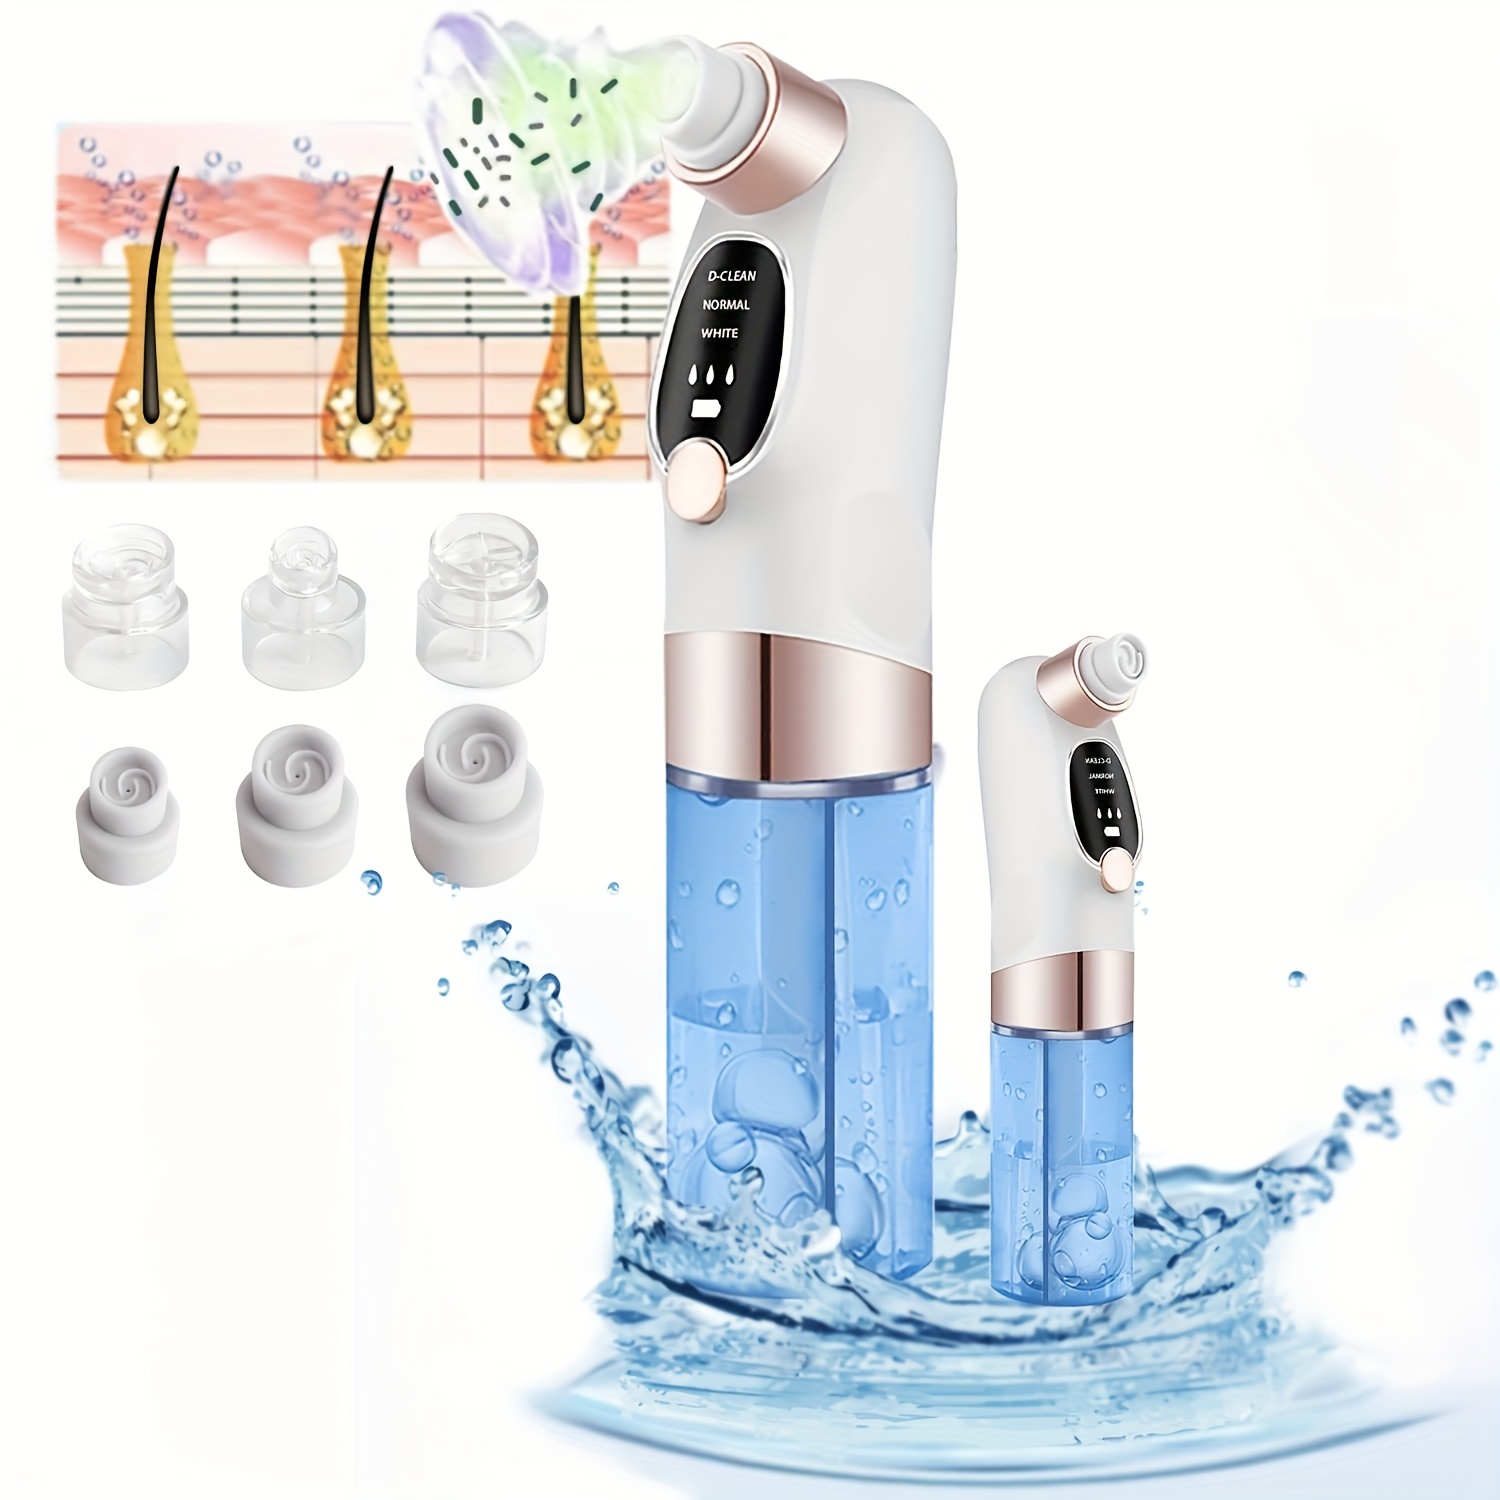 

Blackhead Remover Pore Vacuum, Water Circulation Pore Vacuum Cleaner Extractor Tools With 6 Suction Heads, 3 Gears Adjustable Beauty Device For Men And Women